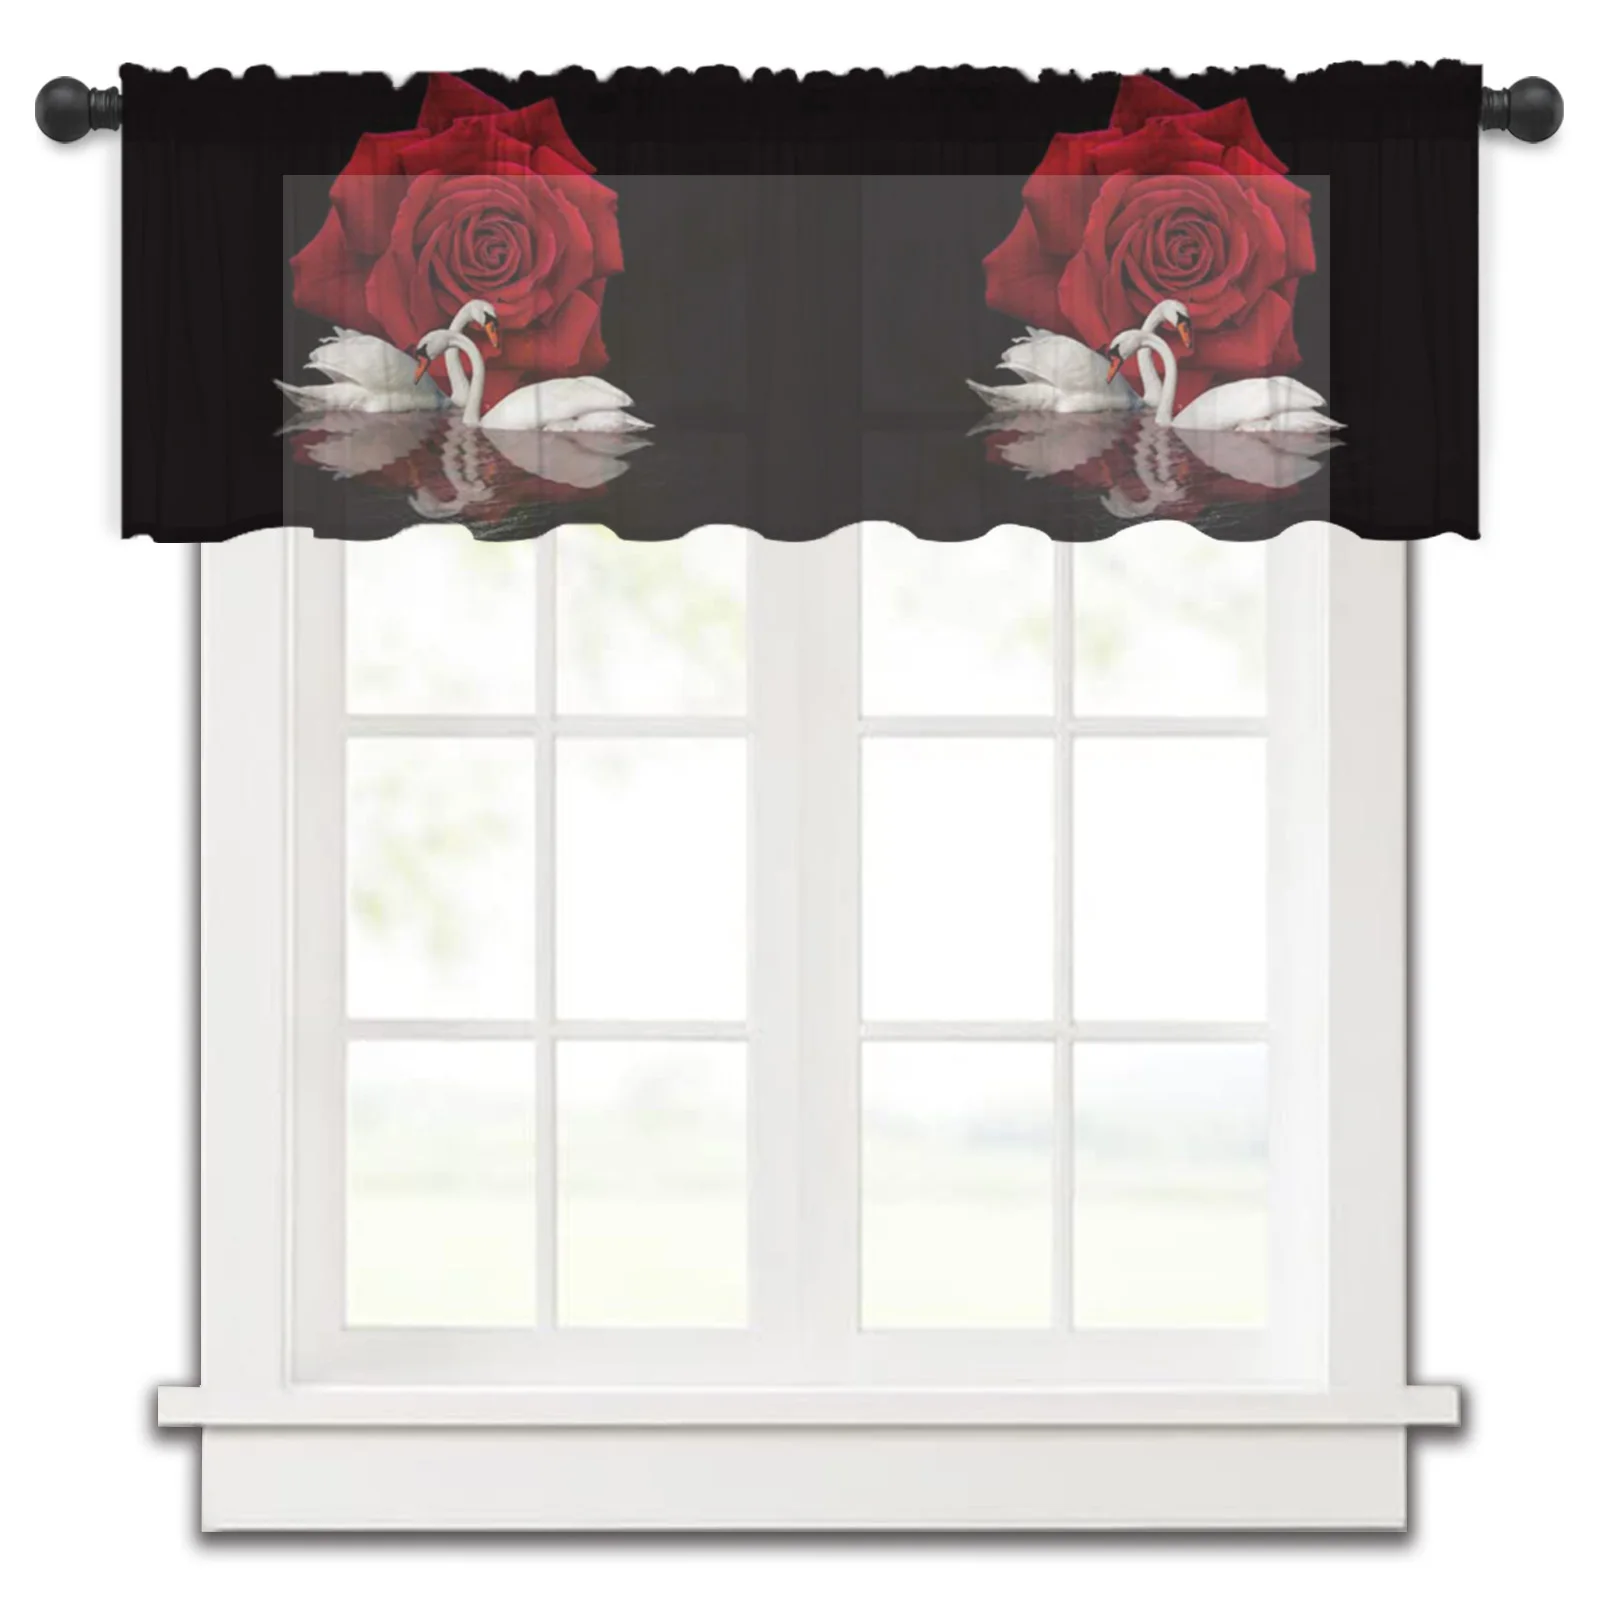 

Valentine'S Day Roses Swan Lake Kitchen Small Curtain Tulle Sheer Short Curtain Bedroom Living Room Home Decor Voile Drapes